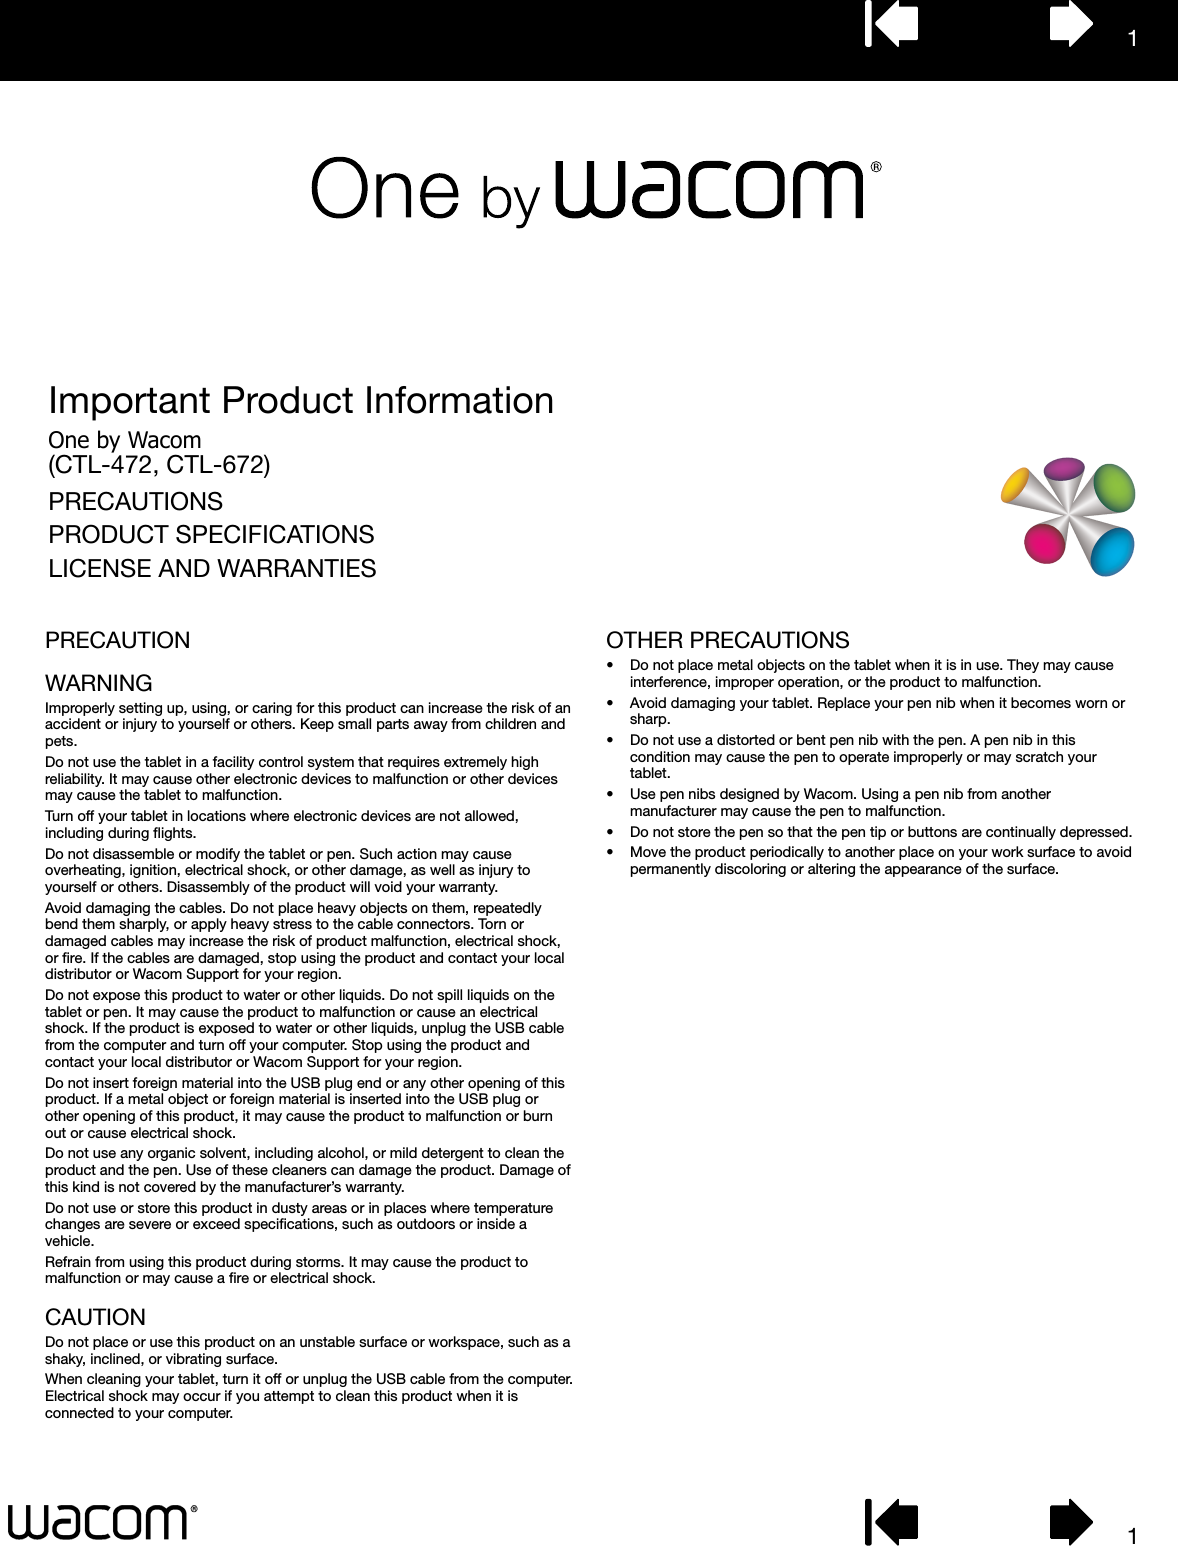 11Important Product InformationOne by Wacom(CTL-472, CTL-672)PRECAUTIONSPRODUCT SPECIFICATIONSLICENSE AND WARRANTIESPRECAUTIONWARNINGImproperly setting up, using, or caring for this product can increase the risk of an accident or injury to yourself or others. Keep small parts away from children and pets.Do not use the tablet in a facility control system that requires extremely high reliability. It may cause other electronic devices to malfunction or other devices may cause the tablet to malfunction.Turn off your tablet in locations where electronic devices are not allowed, including during ﬂights.Do not disassemble or modify the tablet or pen. Such action may cause overheating, ignition, electrical shock, or other damage, as well as injury to yourself or others. Disassembly of the product will void your warranty.Avoid damaging the cables. Do not place heavy objects on them, repeatedly bend them sharply, or apply heavy stress to the cable connectors. Torn or damaged cables may increase the risk of product malfunction, electrical shock, or ﬁre. If the cables are damaged, stop using the product and contact your local distributor or Wacom Support for your region.Do not expose this product to water or other liquids. Do not spill liquids on the tablet or pen. It may cause the product to malfunction or cause an electrical shock. If the product is exposed to water or other liquids, unplug the USB cable from the computer and turn off your computer. Stop using the product and contact your local distributor or Wacom Support for your region.Do not insert foreign material into the USB plug end or any other opening of this product. If a metal object or foreign material is inserted into the USB plug or other opening of this product, it may cause the product to malfunction or burn out or cause electrical shock.Do not use any organic solvent, including alcohol, or mild detergent to clean the product and the pen. Use of these cleaners can damage the product. Damage of this kind is not covered by the manufacturer’s warranty.Do not use or store this product in dusty areas or in places where temperature changes are severe or exceed speciﬁcations, such as outdoors or inside a vehicle.Refrain from using this product during storms. It may cause the product to malfunction or may cause a ﬁre or electrical shock.CAUTIONDo not place or use this product on an unstable surface or workspace, such as a shaky, inclined, or vibrating surface.When cleaning your tablet, turn it off or unplug the USB cable from the computer. Electrical shock may occur if you attempt to clean this product when it is connected to your computer.OTHER PRECAUTIONS•  Do not place metal objects on the tablet when it is in use. They may cause interference, improper operation, or the product to malfunction.•  Avoid damaging your tablet. Replace your pen nib when it becomes worn or sharp.•  Do not use a distorted or bent pen nib with the pen. A pen nib in this condition may cause the pen to operate improperly or may scratch your tablet.•  Use pen nibs designed by Wacom. Using a pen nib from another manufacturer may cause the pen to malfunction.•  Do not store the pen so that the pen tip or buttons are continually depressed.•  Move the product periodically to another place on your work surface to avoid permanently discoloring or altering the appearance of the surface.